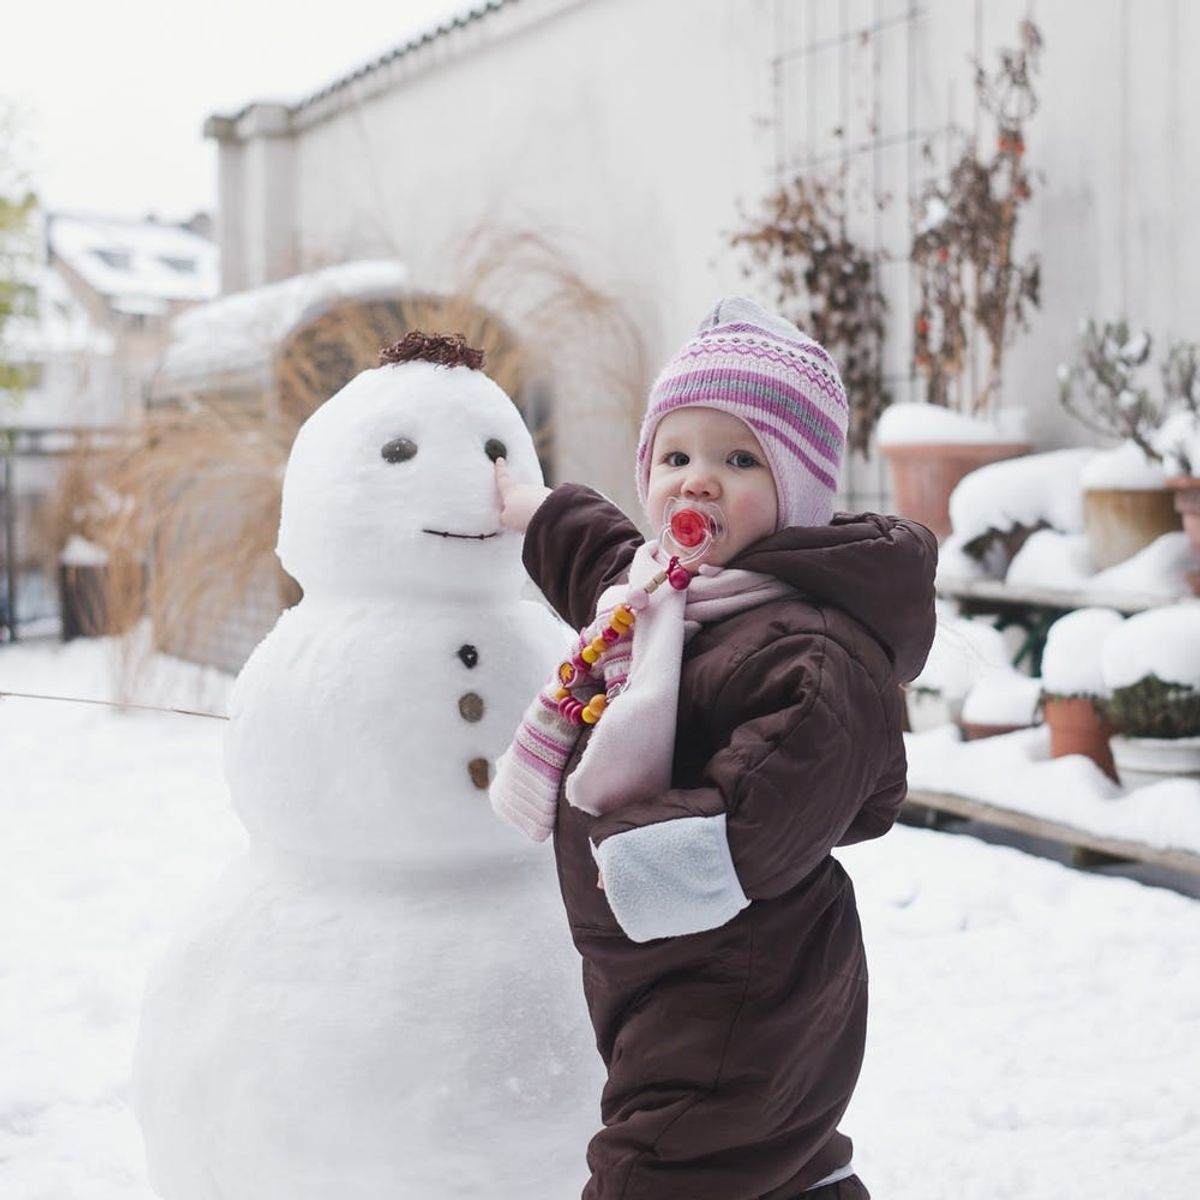 5 Winter-Wonderland Activities for You and Your Baby